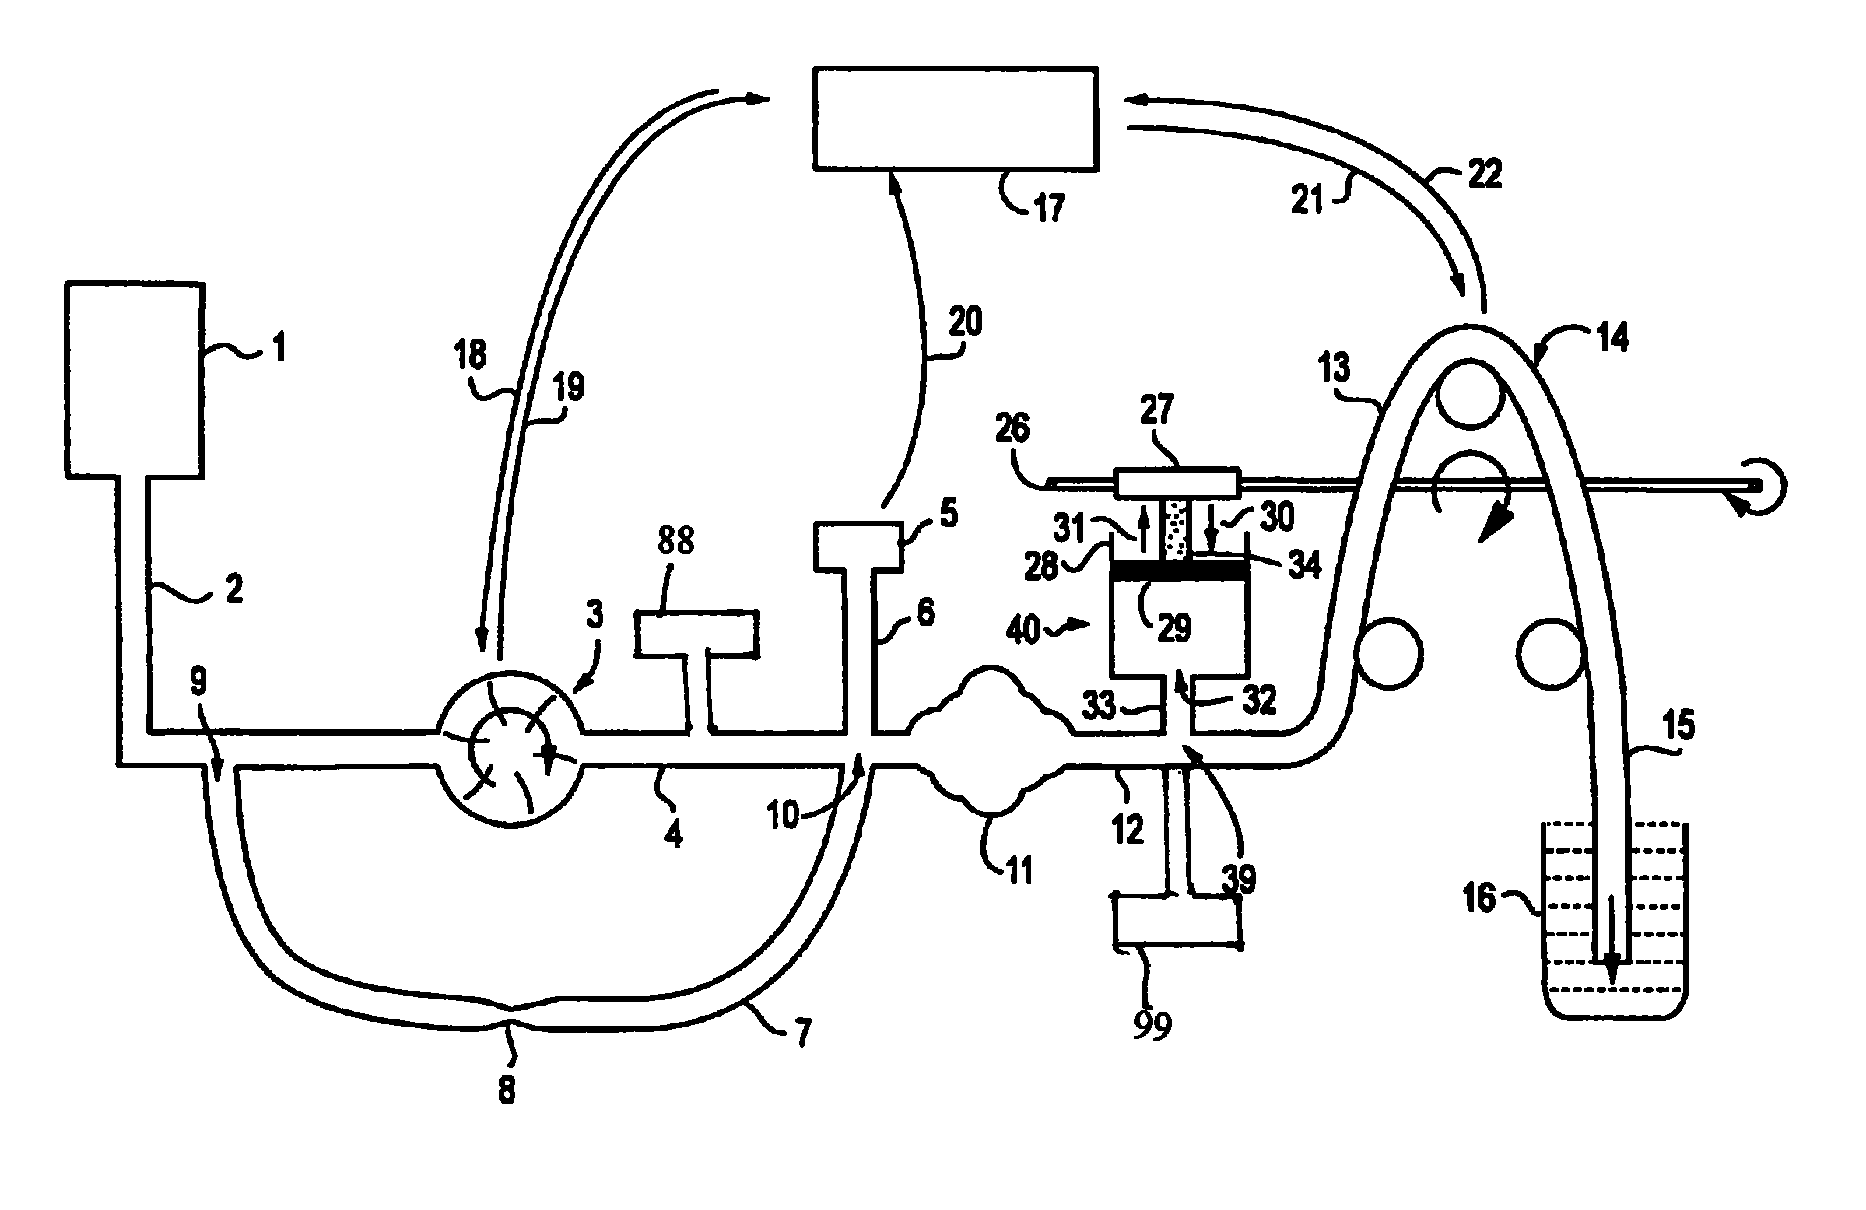 Controlled tissue cavity distending system with minimal turbulence